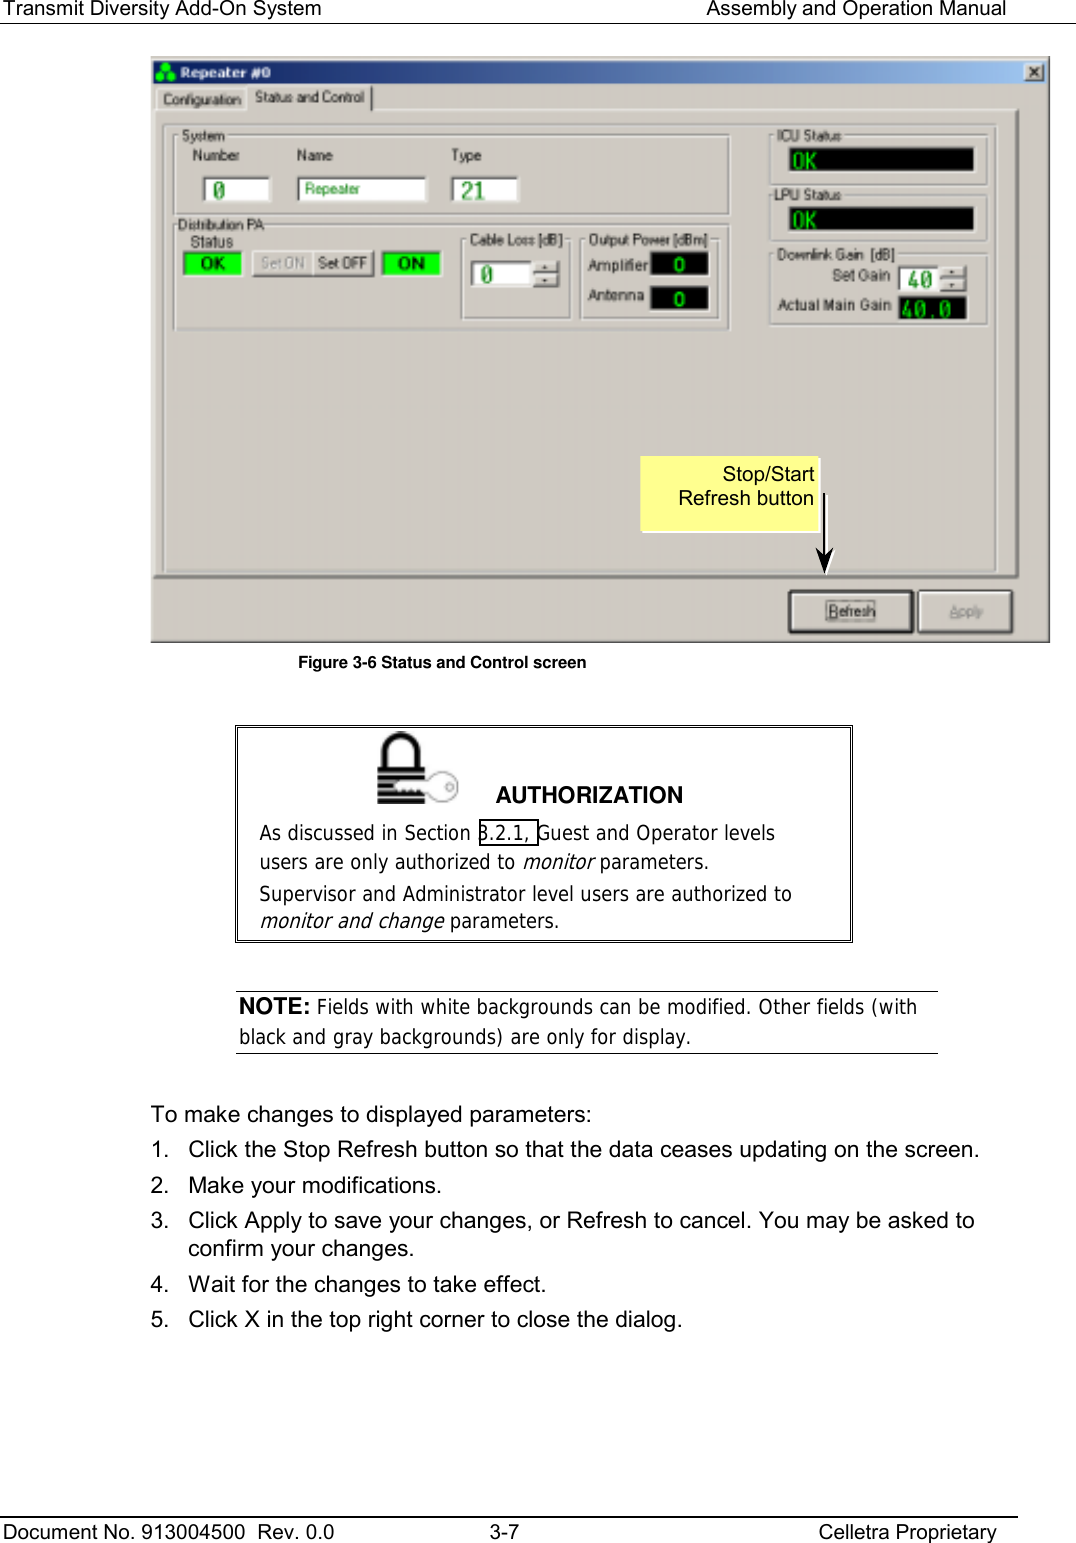 Transmit Diversity Add-On System   Assembly and Operation Manual  Document No. 913004500  Rev. 0.0  3-7  Celletra Proprietary   Figure  3-6 Status and Control screen   AUTHORIZATION As discussed in Section  3.2.1, Guest and Operator levels users are only authorized to monitor parameters.  Supervisor and Administrator level users are authorized to monitor and change parameters.  NOTE: Fields with white backgrounds can be modified. Other fields (with black and gray backgrounds) are only for display.  To make changes to displayed parameters: 1.  Click the Stop Refresh button so that the data ceases updating on the screen.  2.  Make your modifications. 3.  Click Apply to save your changes, or Refresh to cancel. You may be asked to confirm your changes. 4.  Wait for the changes to take effect. 5.  Click X in the top right corner to close the dialog. Stop/Start Refresh button 